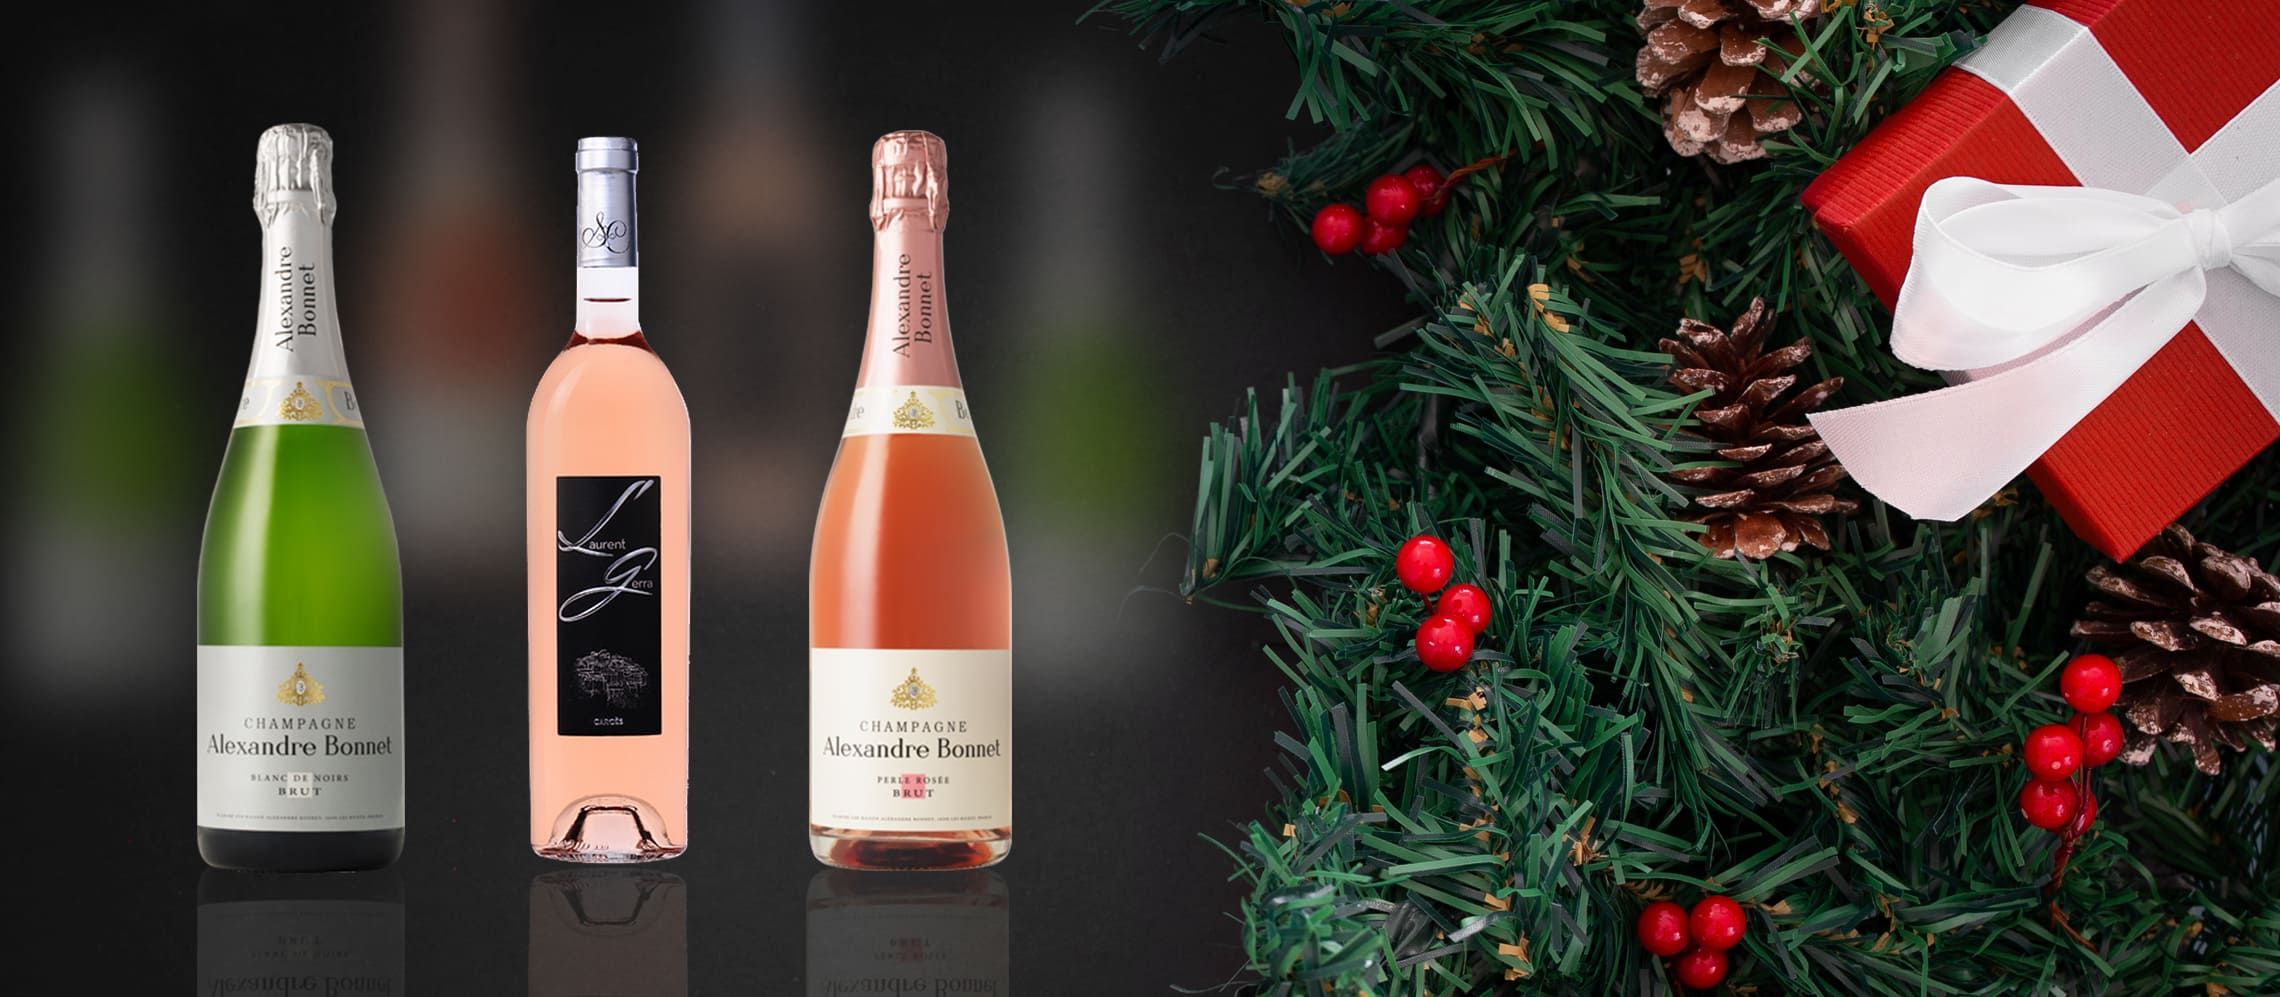 Photo for: 5 French Wines to Sip on This Holiday Season